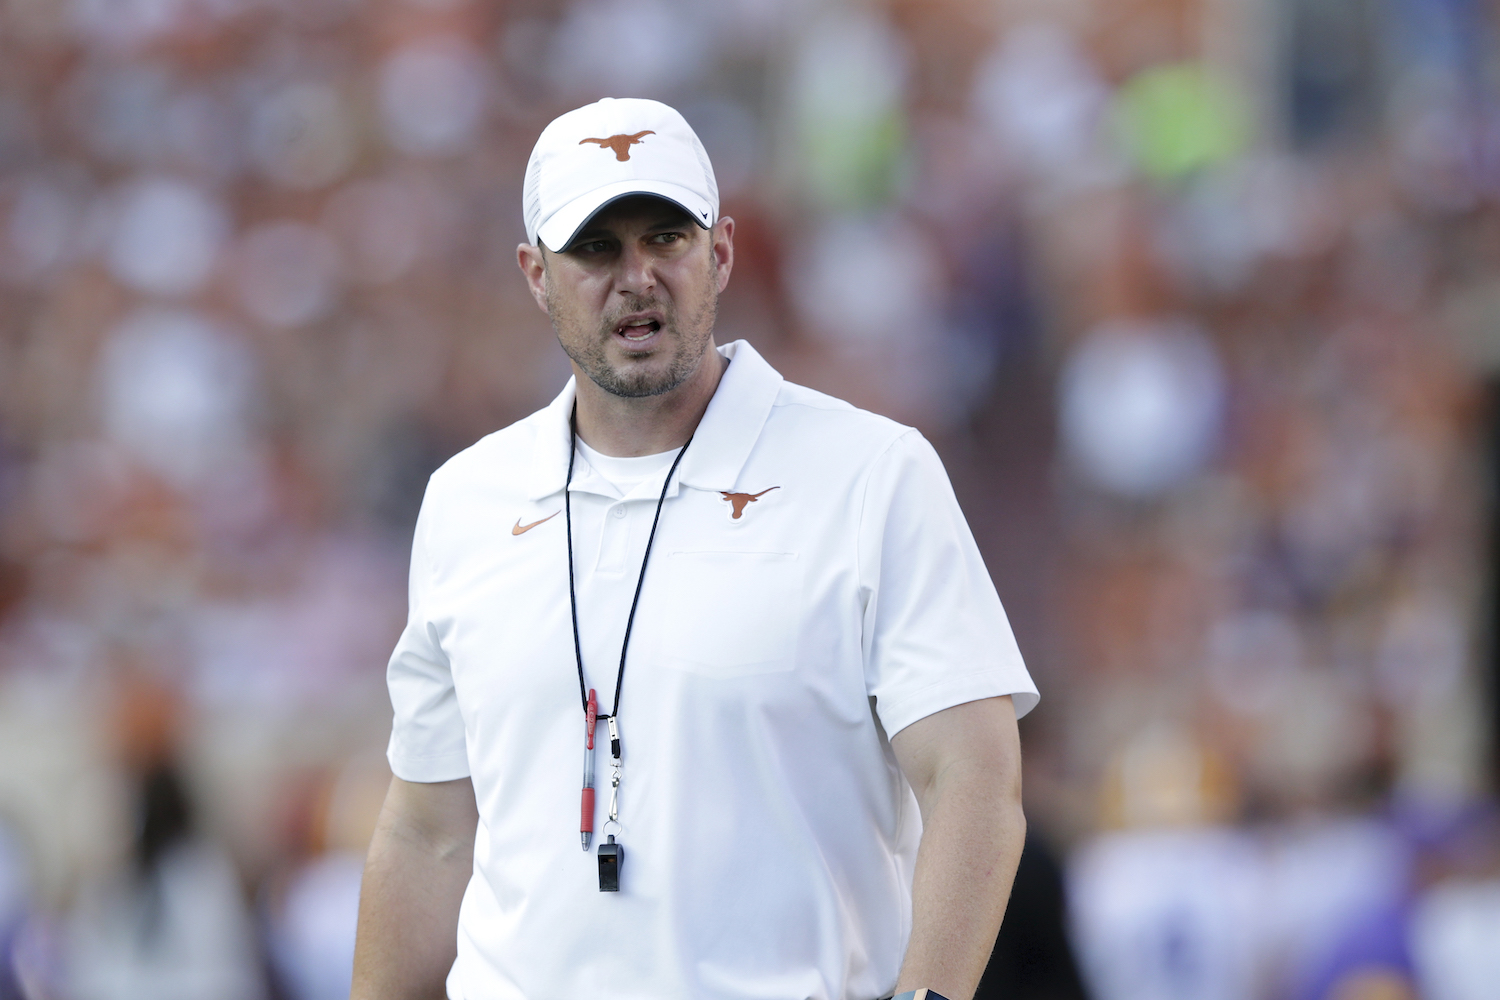 Tom Herman Actively Looking to Leave Texas Longhorns According to Report